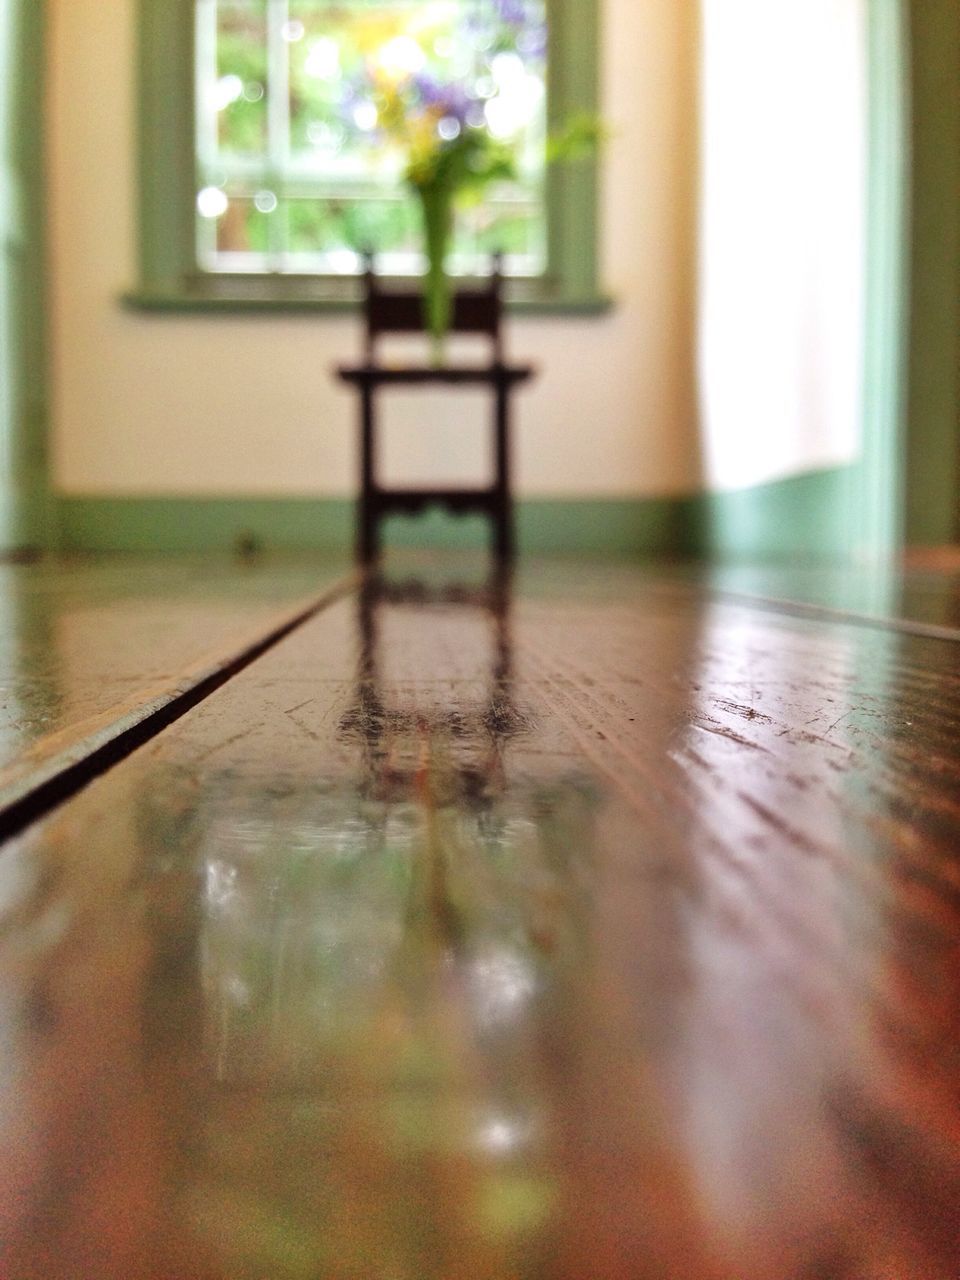 indoors, window, table, selective focus, glass - material, reflection, transparent, built structure, architecture, focus on foreground, water, wood - material, flooring, home interior, surface level, no people, day, empty, close-up, house